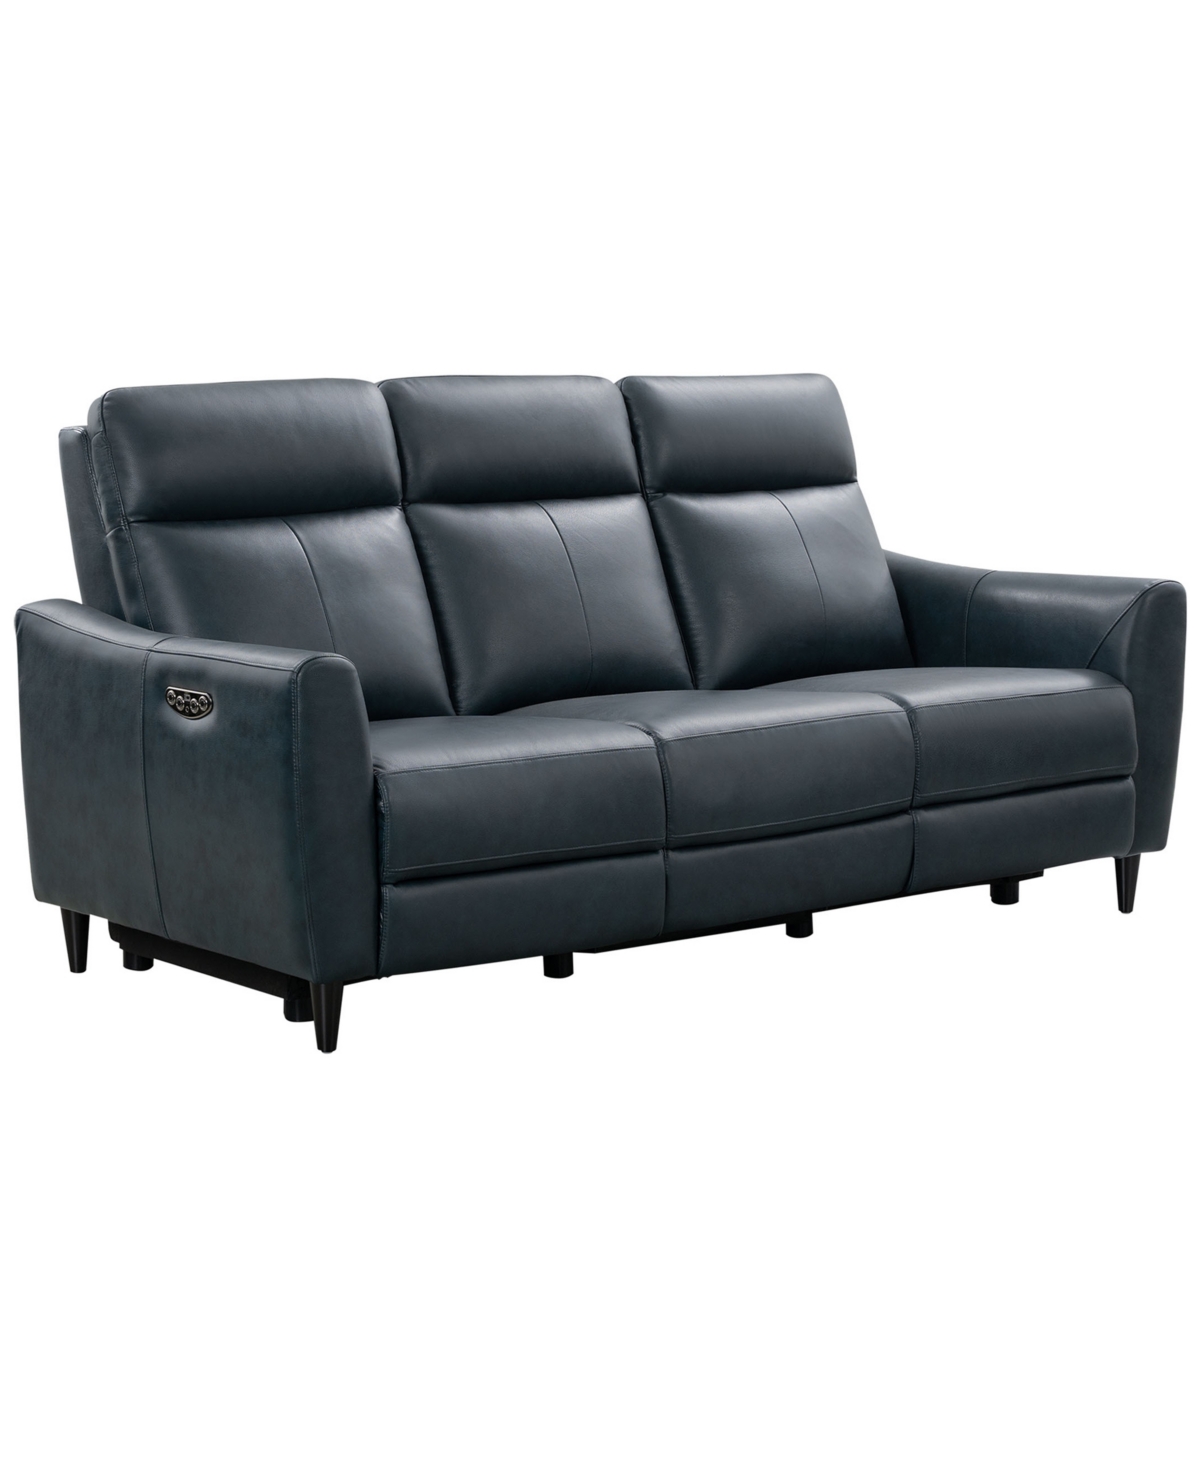 Abbyson Living Tanya 86" Leather Power Reclining Sofa With Power Headrest In Dark Gray